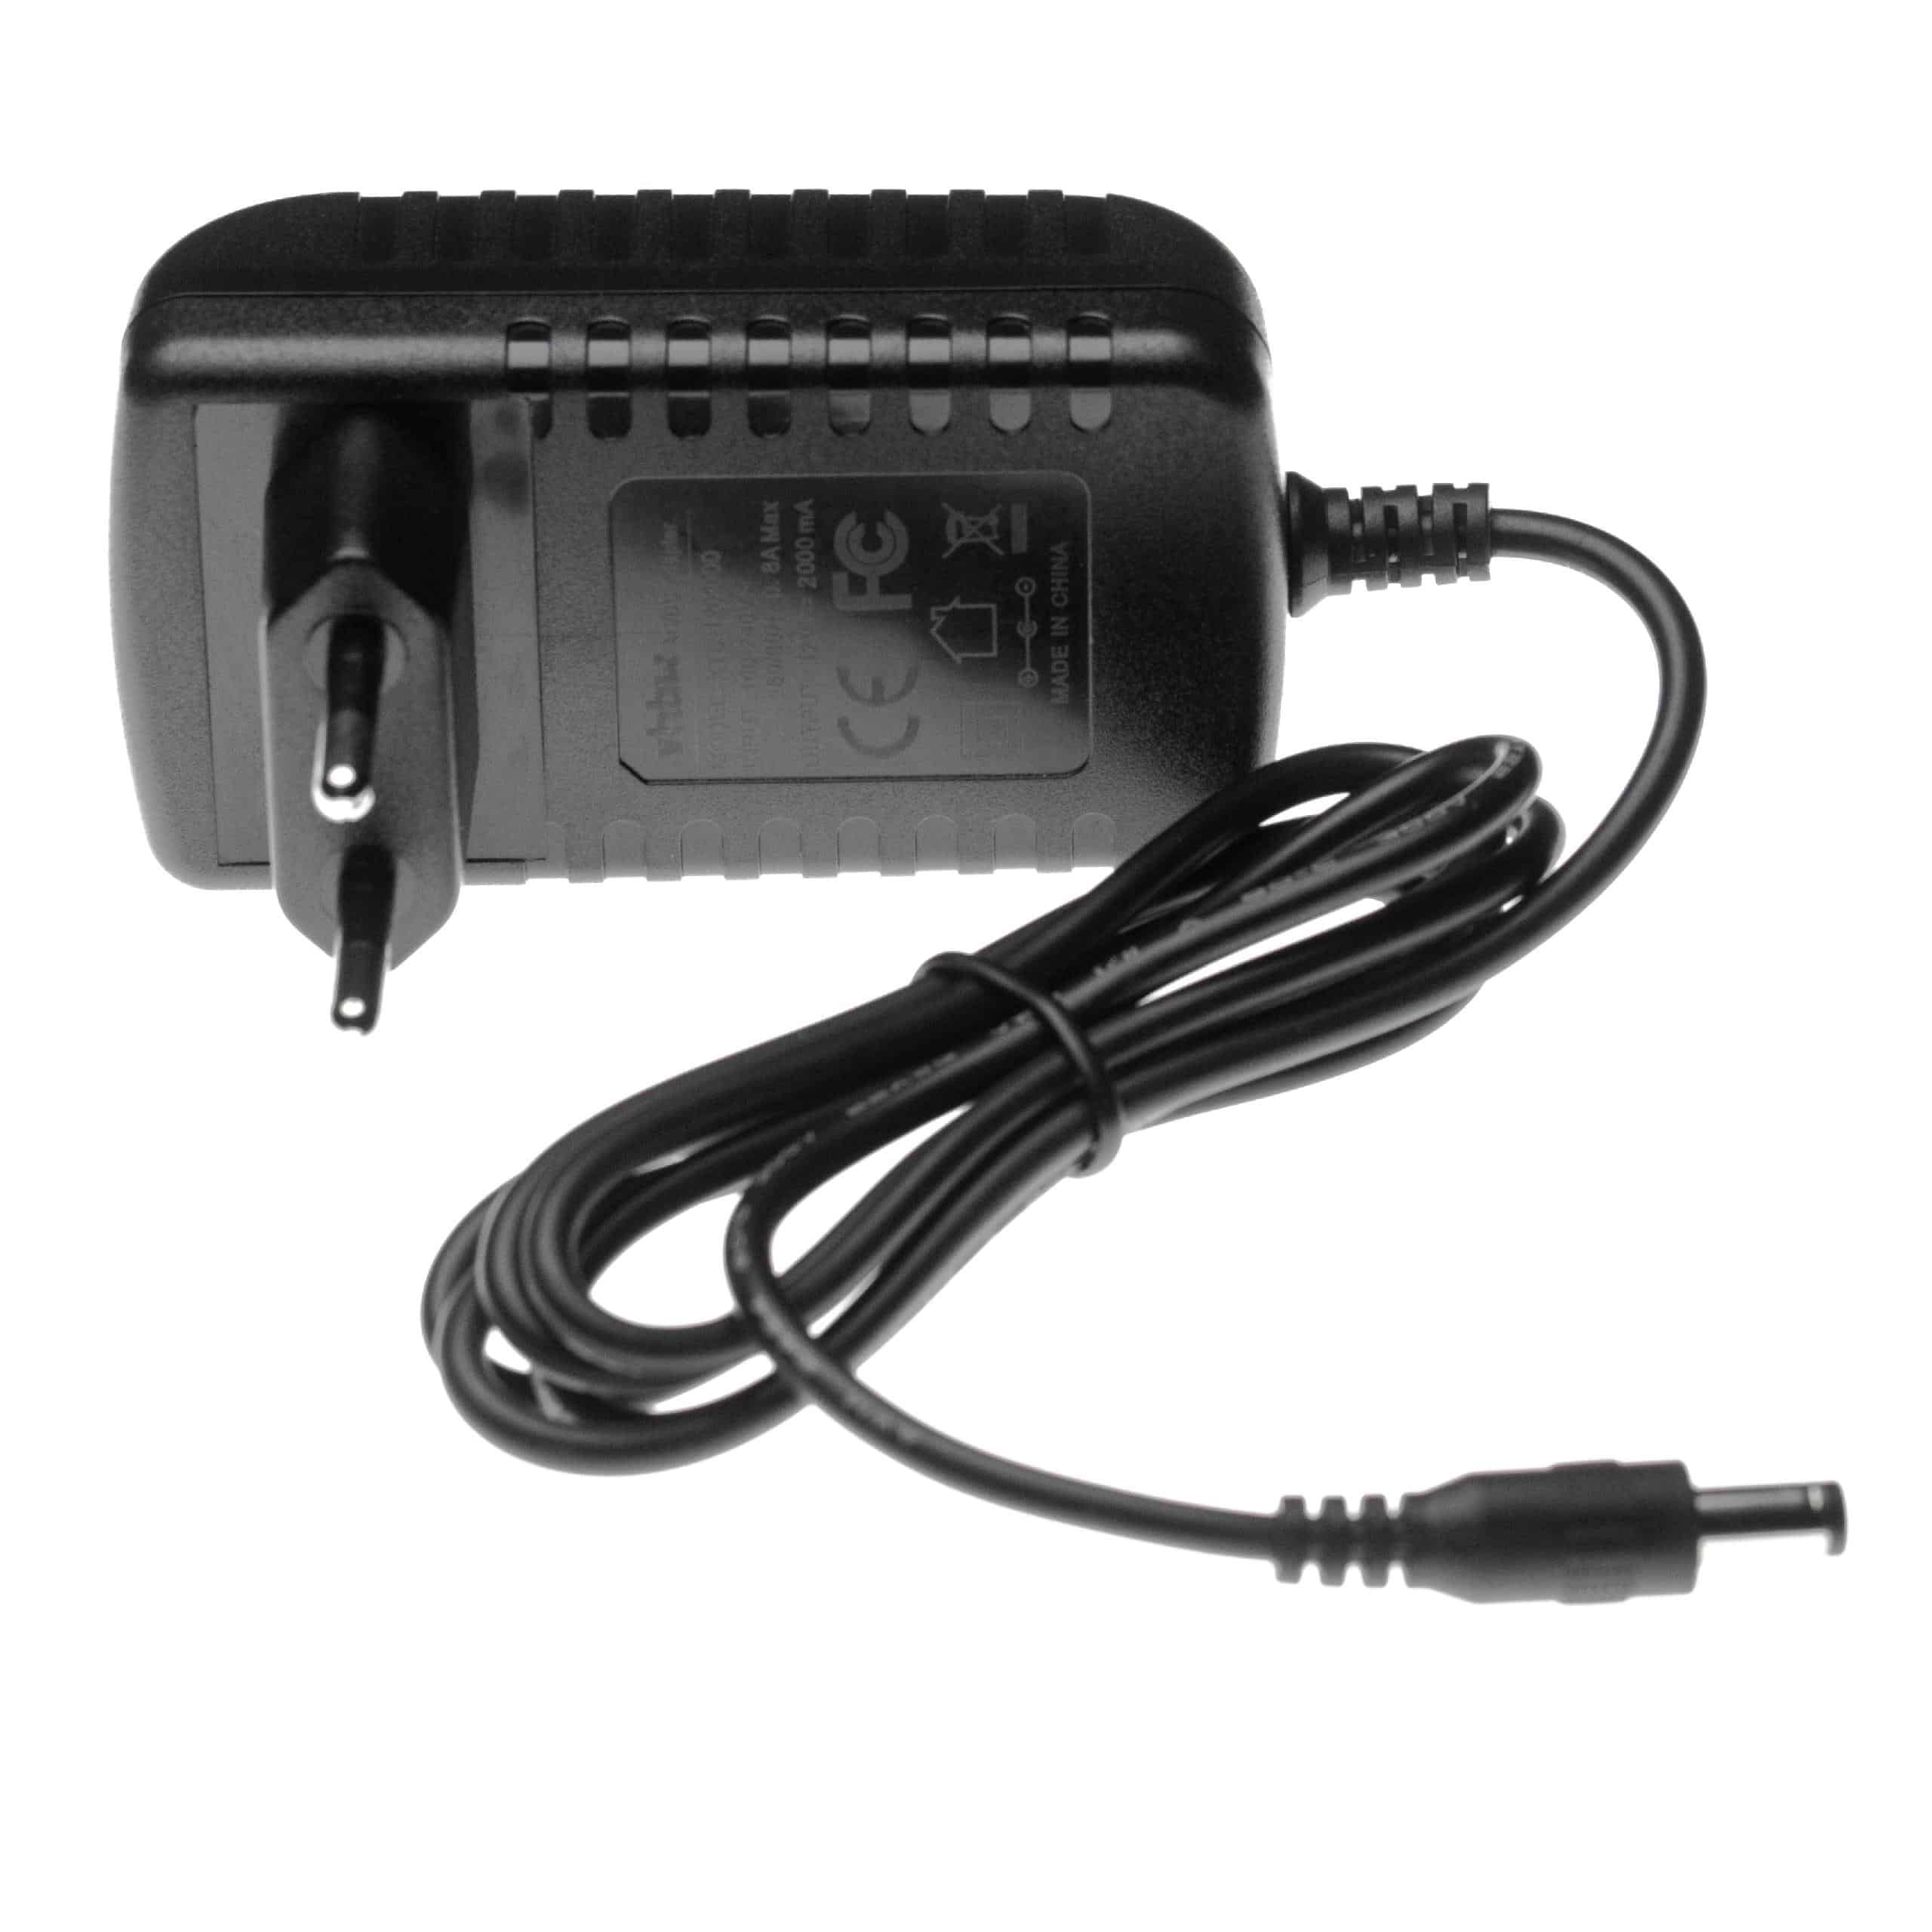 Mains Power Adapter replaces Brother AD-E001 for Brother Labelling Machine - DC 12 V / 2.0 A